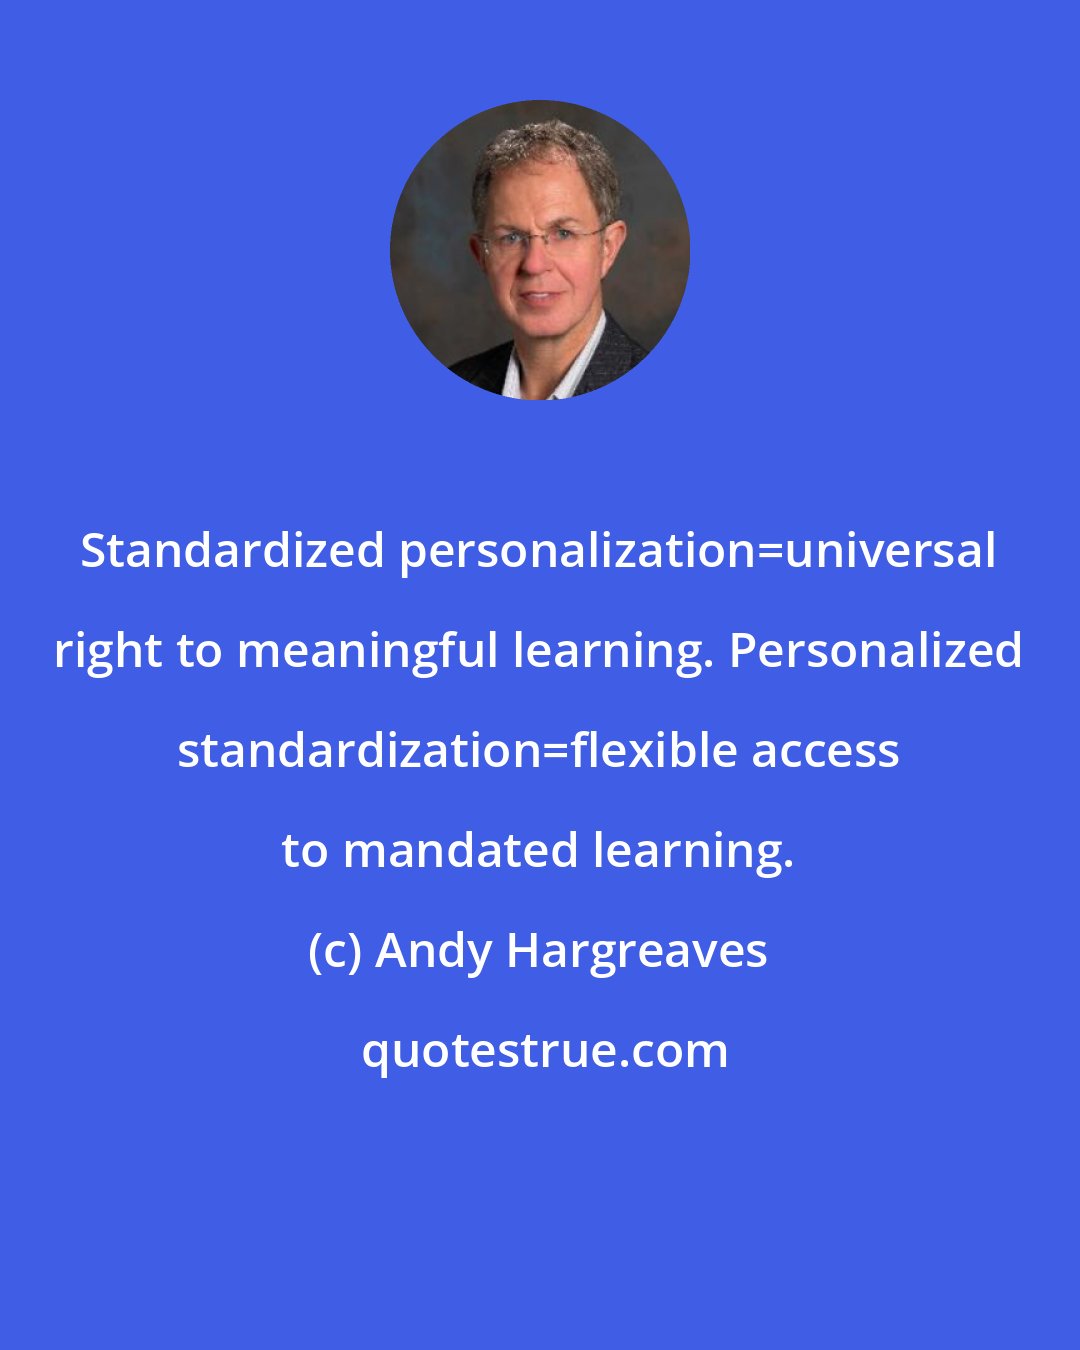 Andy Hargreaves: Standardized personalization=universal right to meaningful learning. Personalized standardization=flexible access to mandated learning.